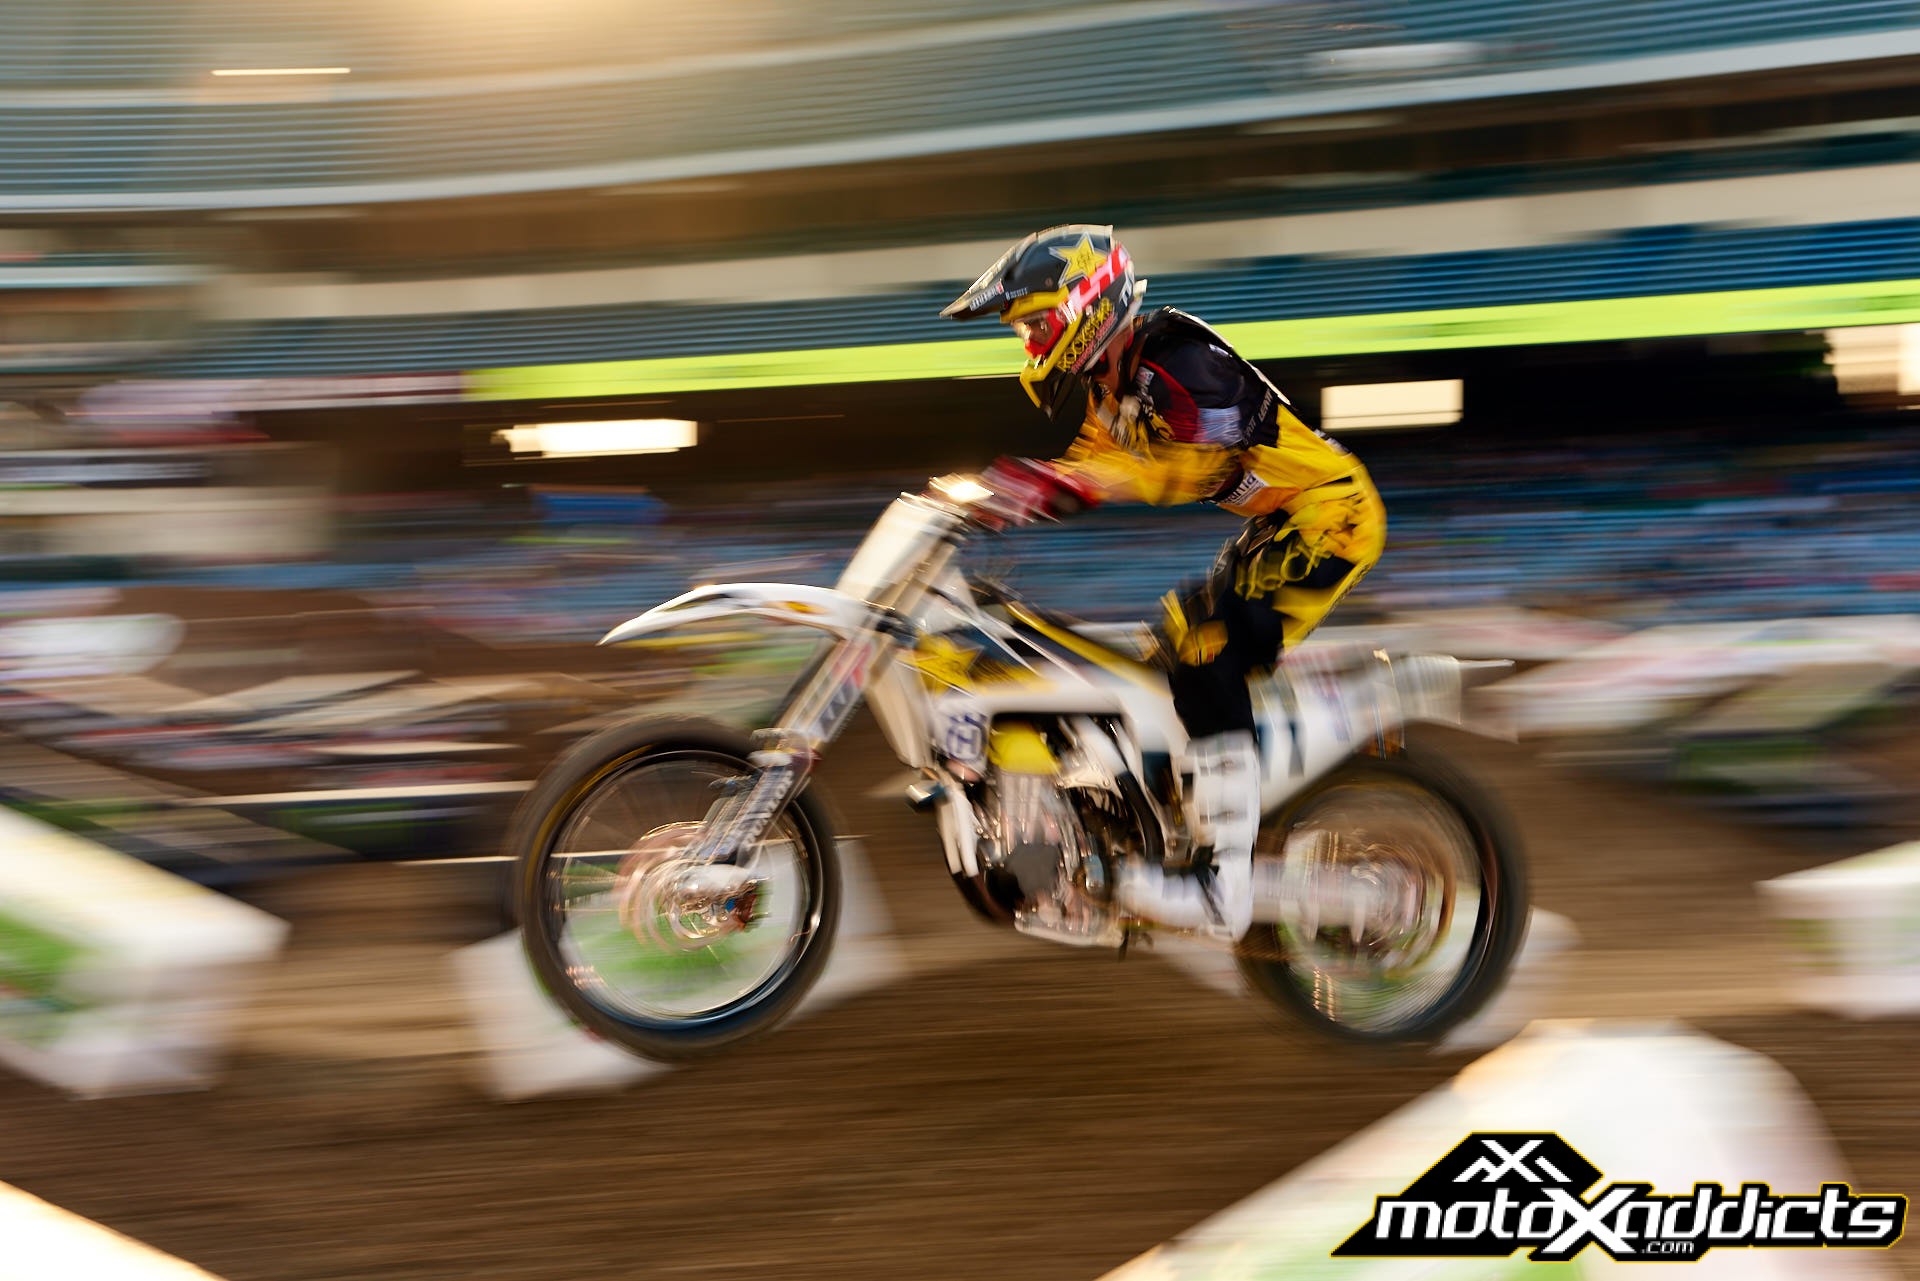 Christophe skimming the whoops in Anaheim. Photo by: Hoppenworld